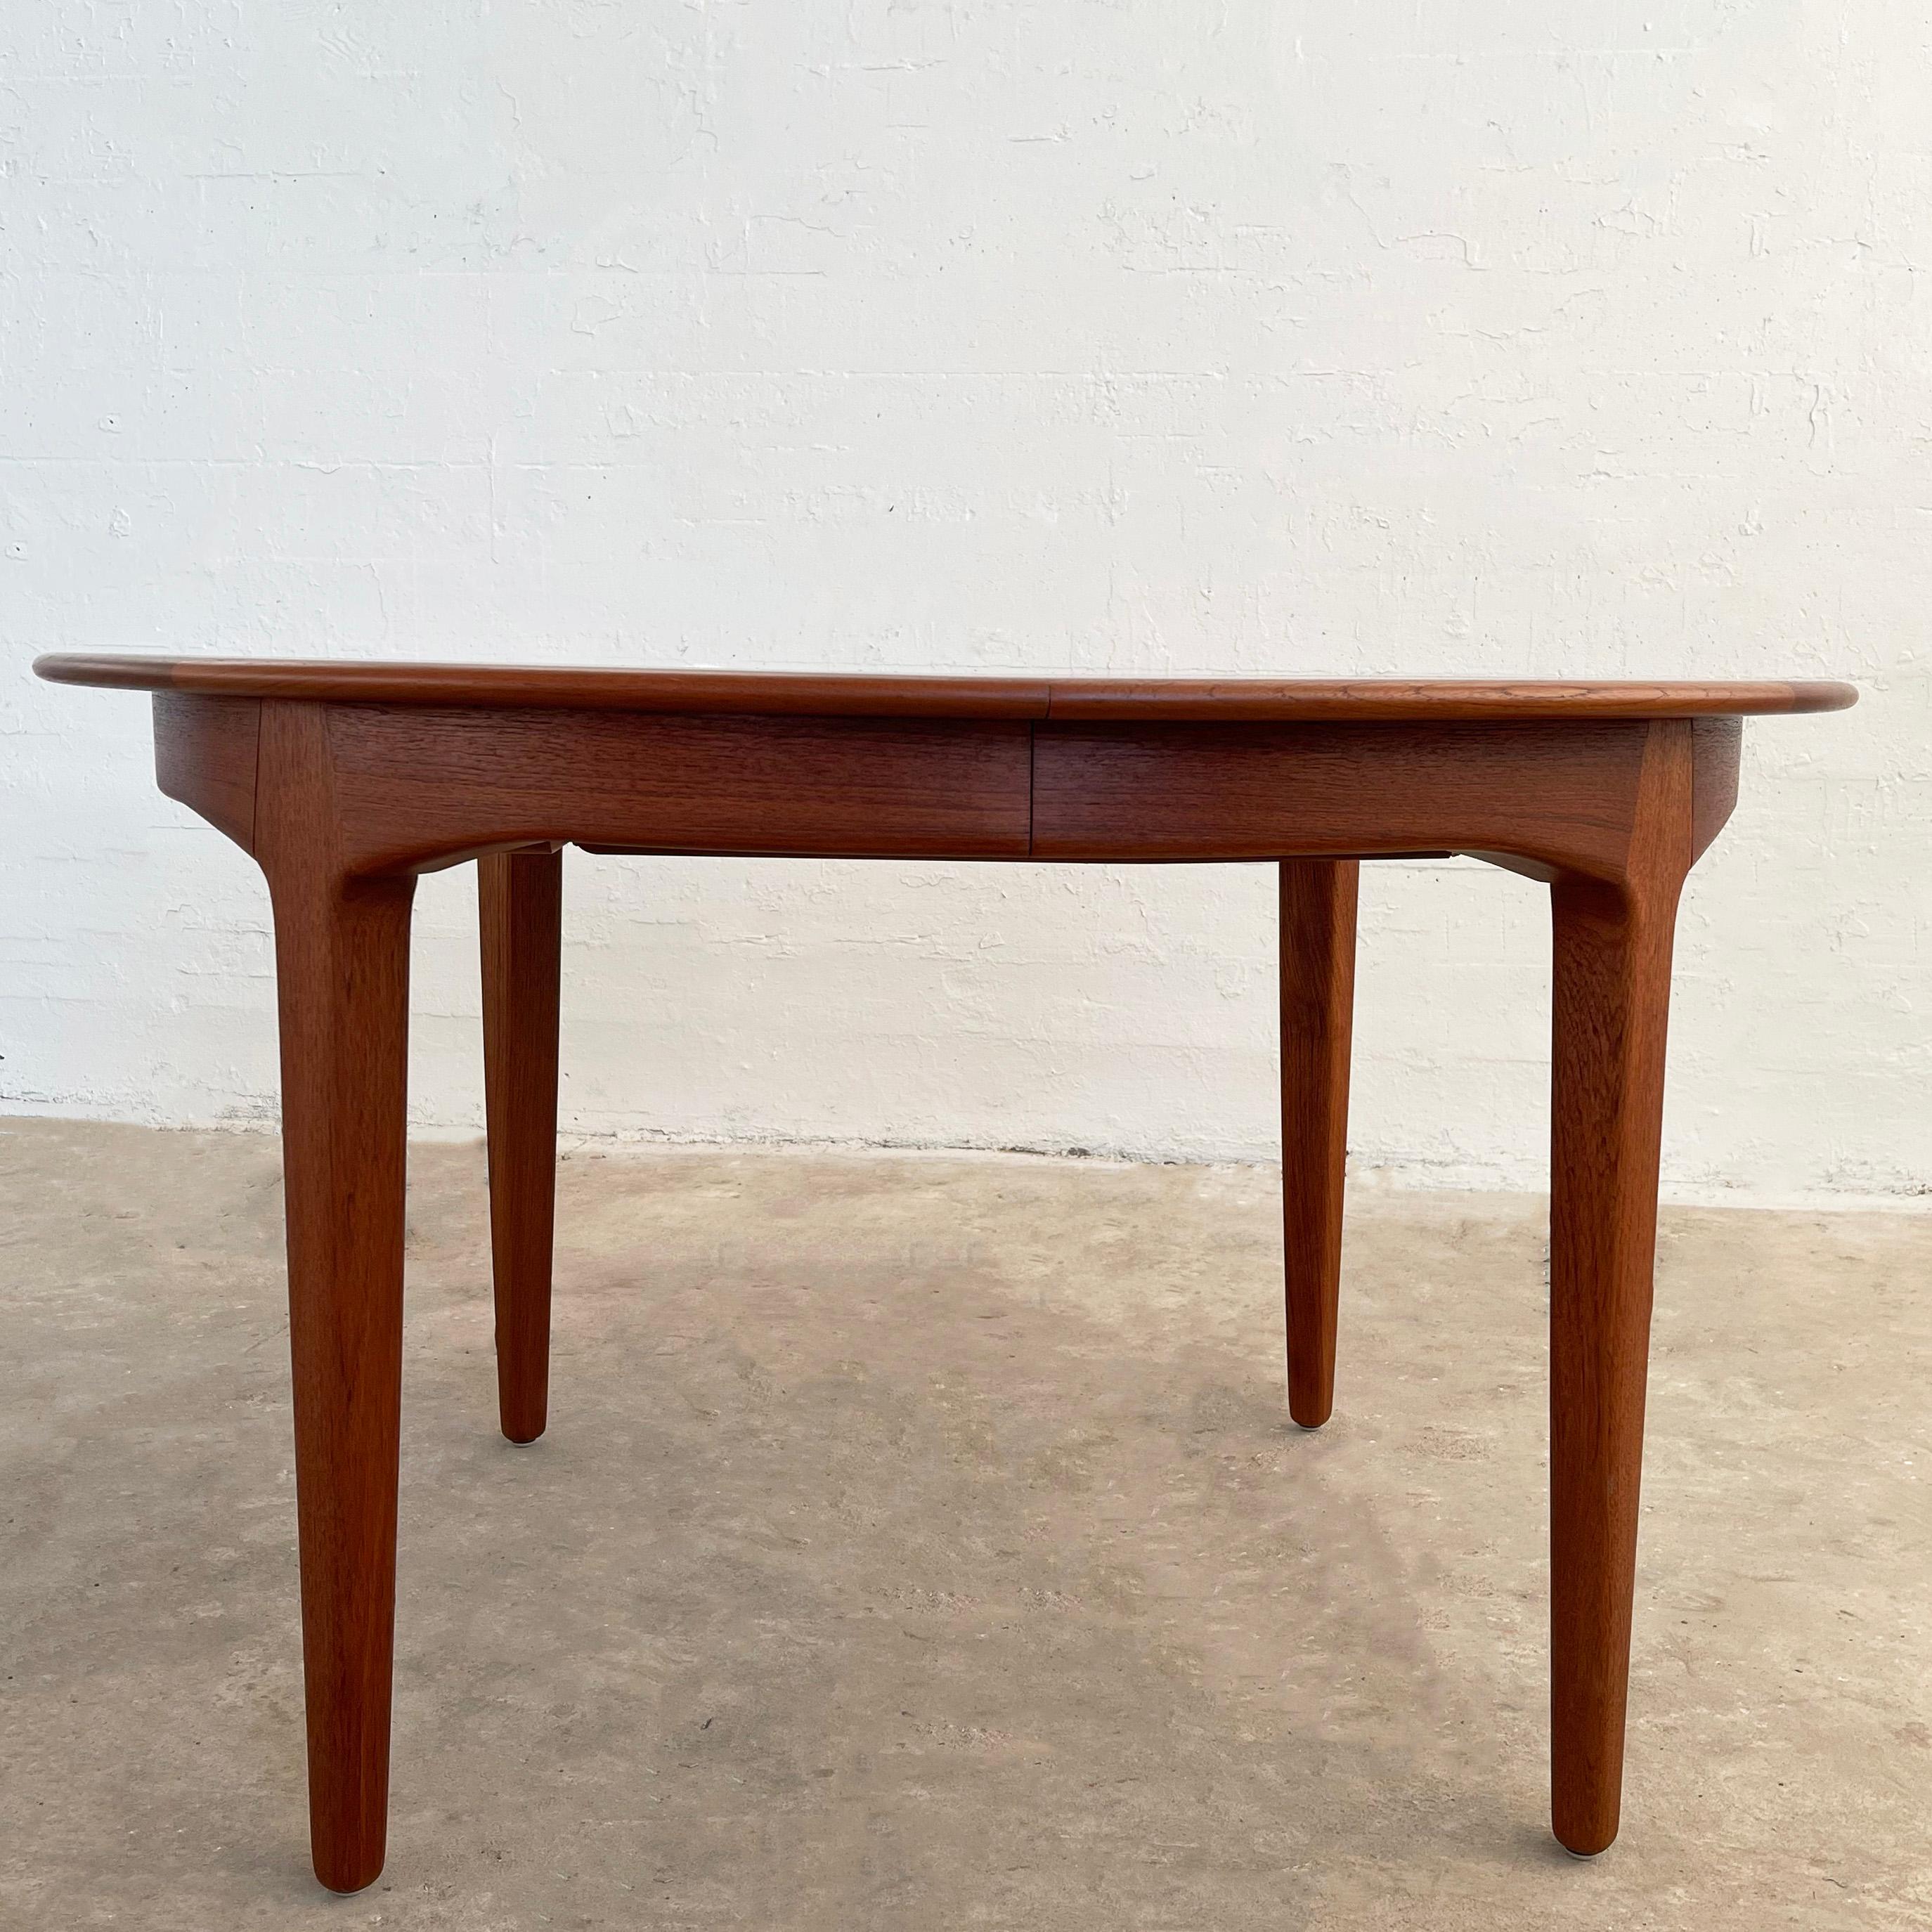 Round Teak Extension Dining Table By Henning Kjaernulf For Soro Stole, Denmark In Good Condition For Sale In Brooklyn, NY